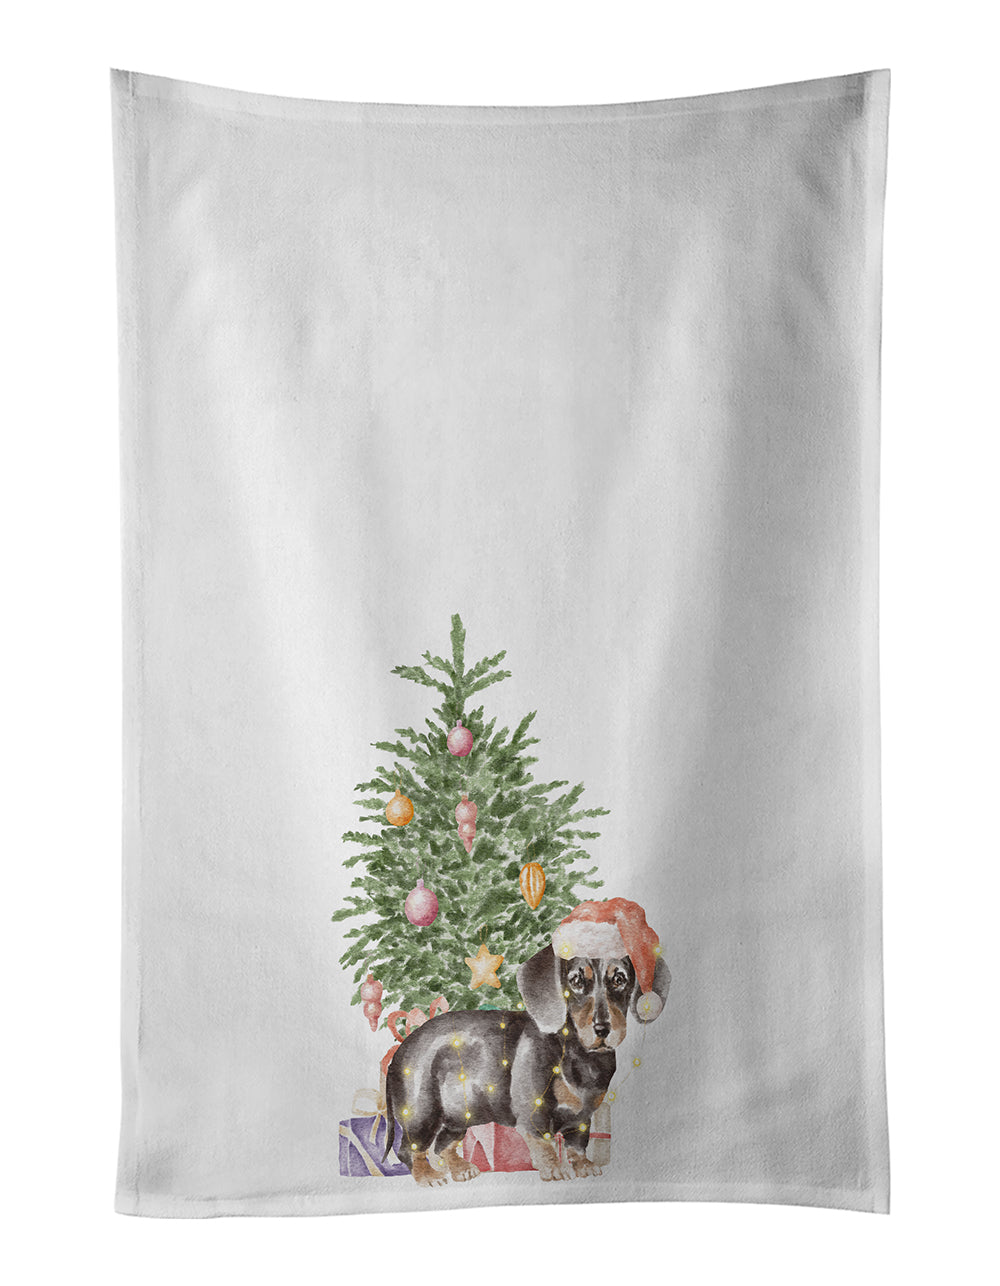 Buy this Dachshund Black Tan Puppy Christmas Presents and Tree White Kitchen Towel Set of 2